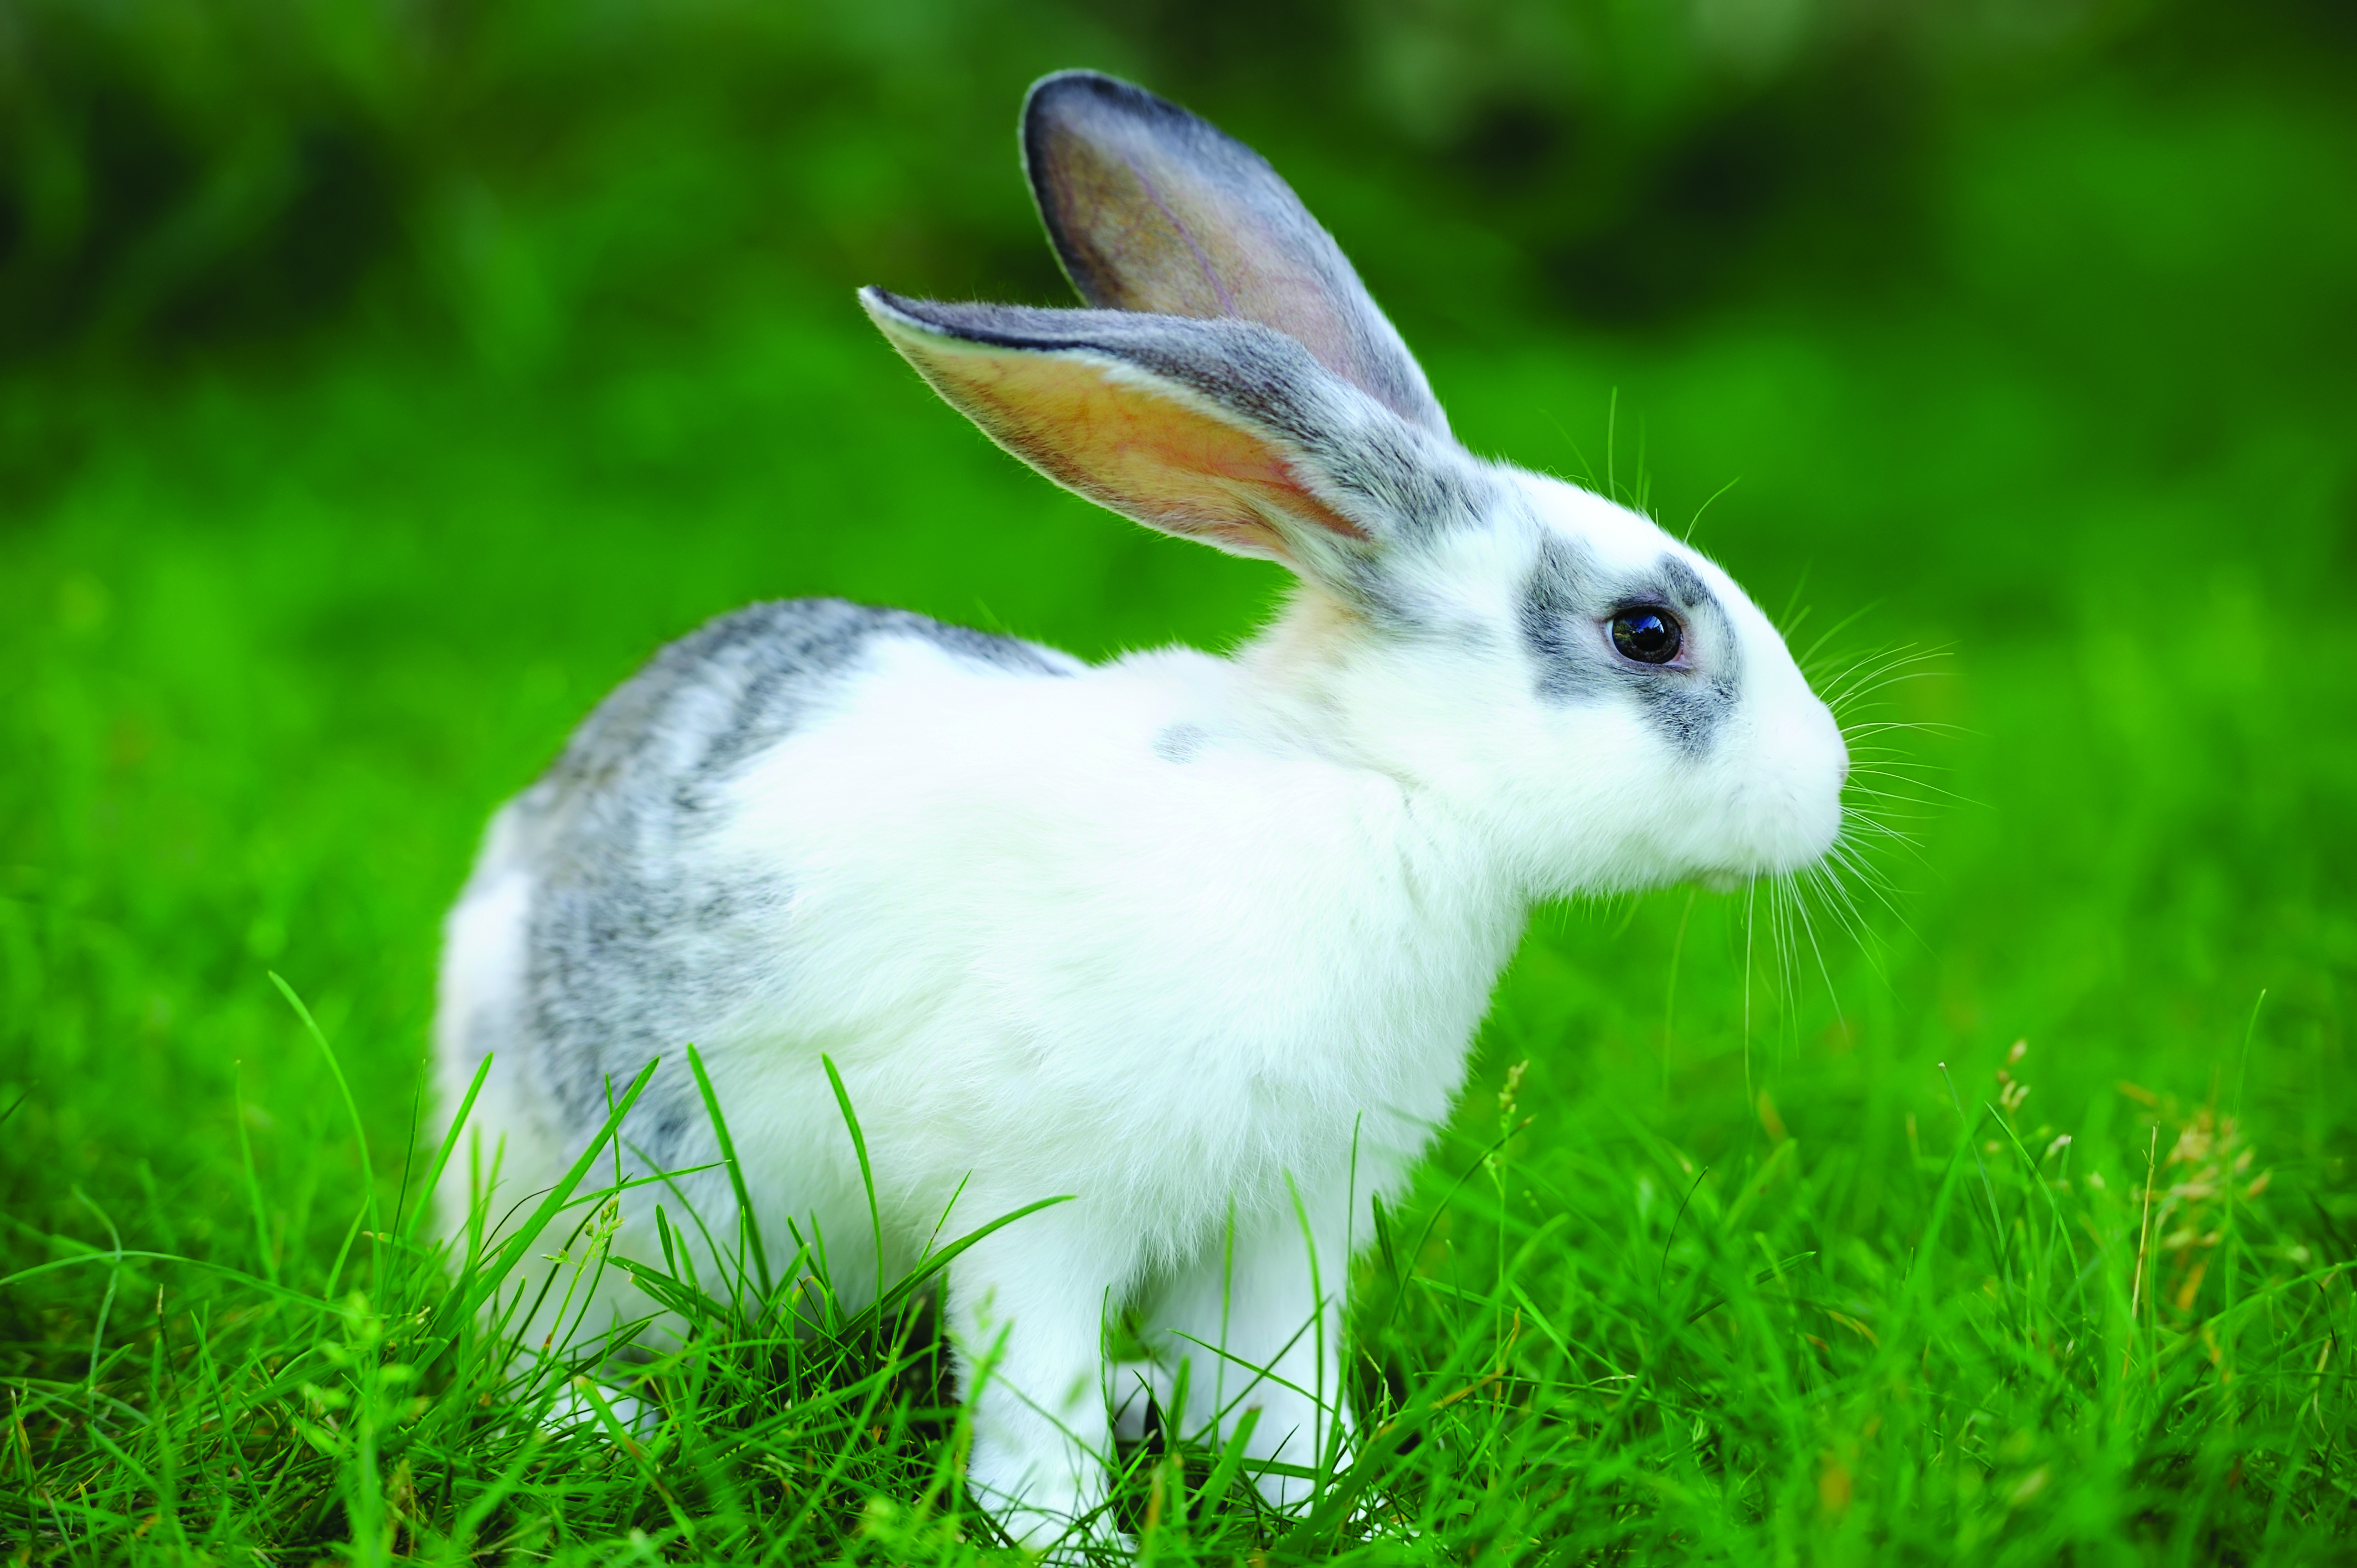 Fun facts: All about rabbits and hares